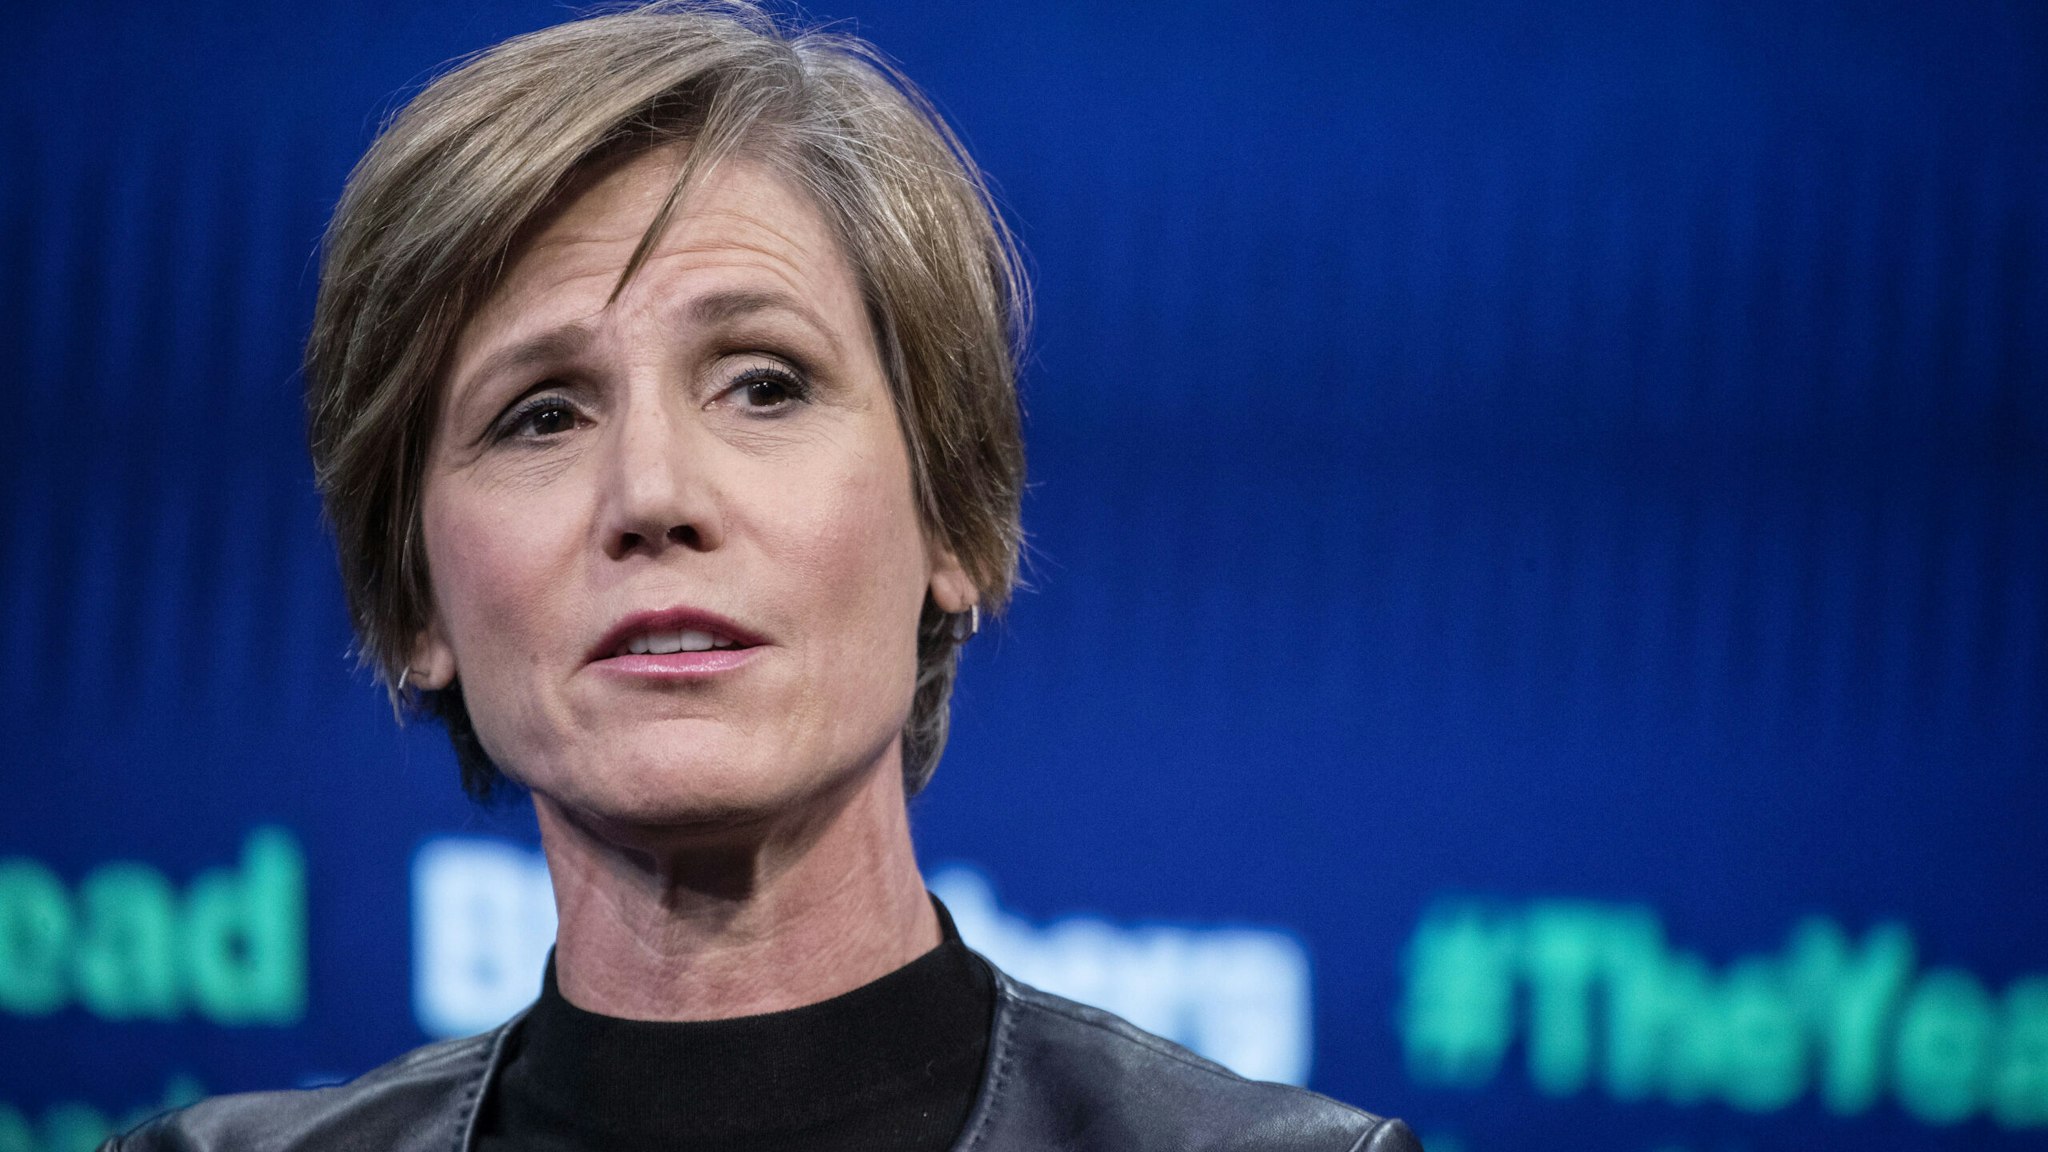 Sally Yates, partner of King & Spalding LLP, speaks during the Bloomberg Year Ahead Summit in New York, U.S., on Wednesday, Nov. 28, 2018. The summit addresses the most important trends, issues and challenges every executive will need to consider in 2019 and beyond. Photographer: Victor J. Blue/Bloomberg via Getty Images